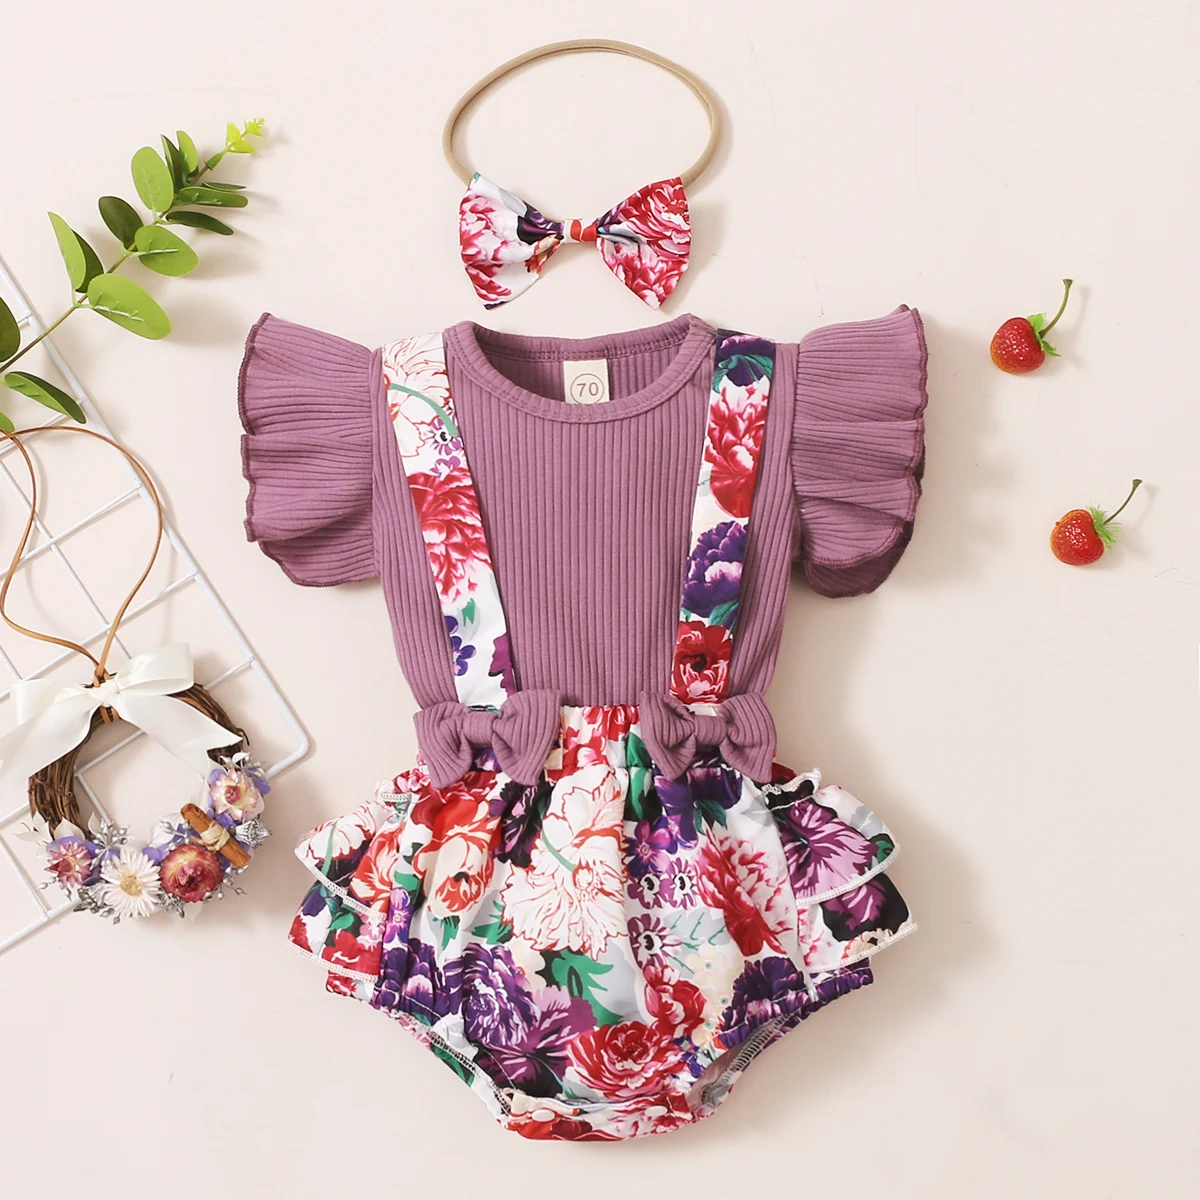 small baby clothing set	 FOCUSNORM 0-18M 3pcs Infant Baby Girls Clothes Sets Ruffles Fly Sleeve Solid T Shirts Flowers Overalls Shorts Headband baby clothing set line